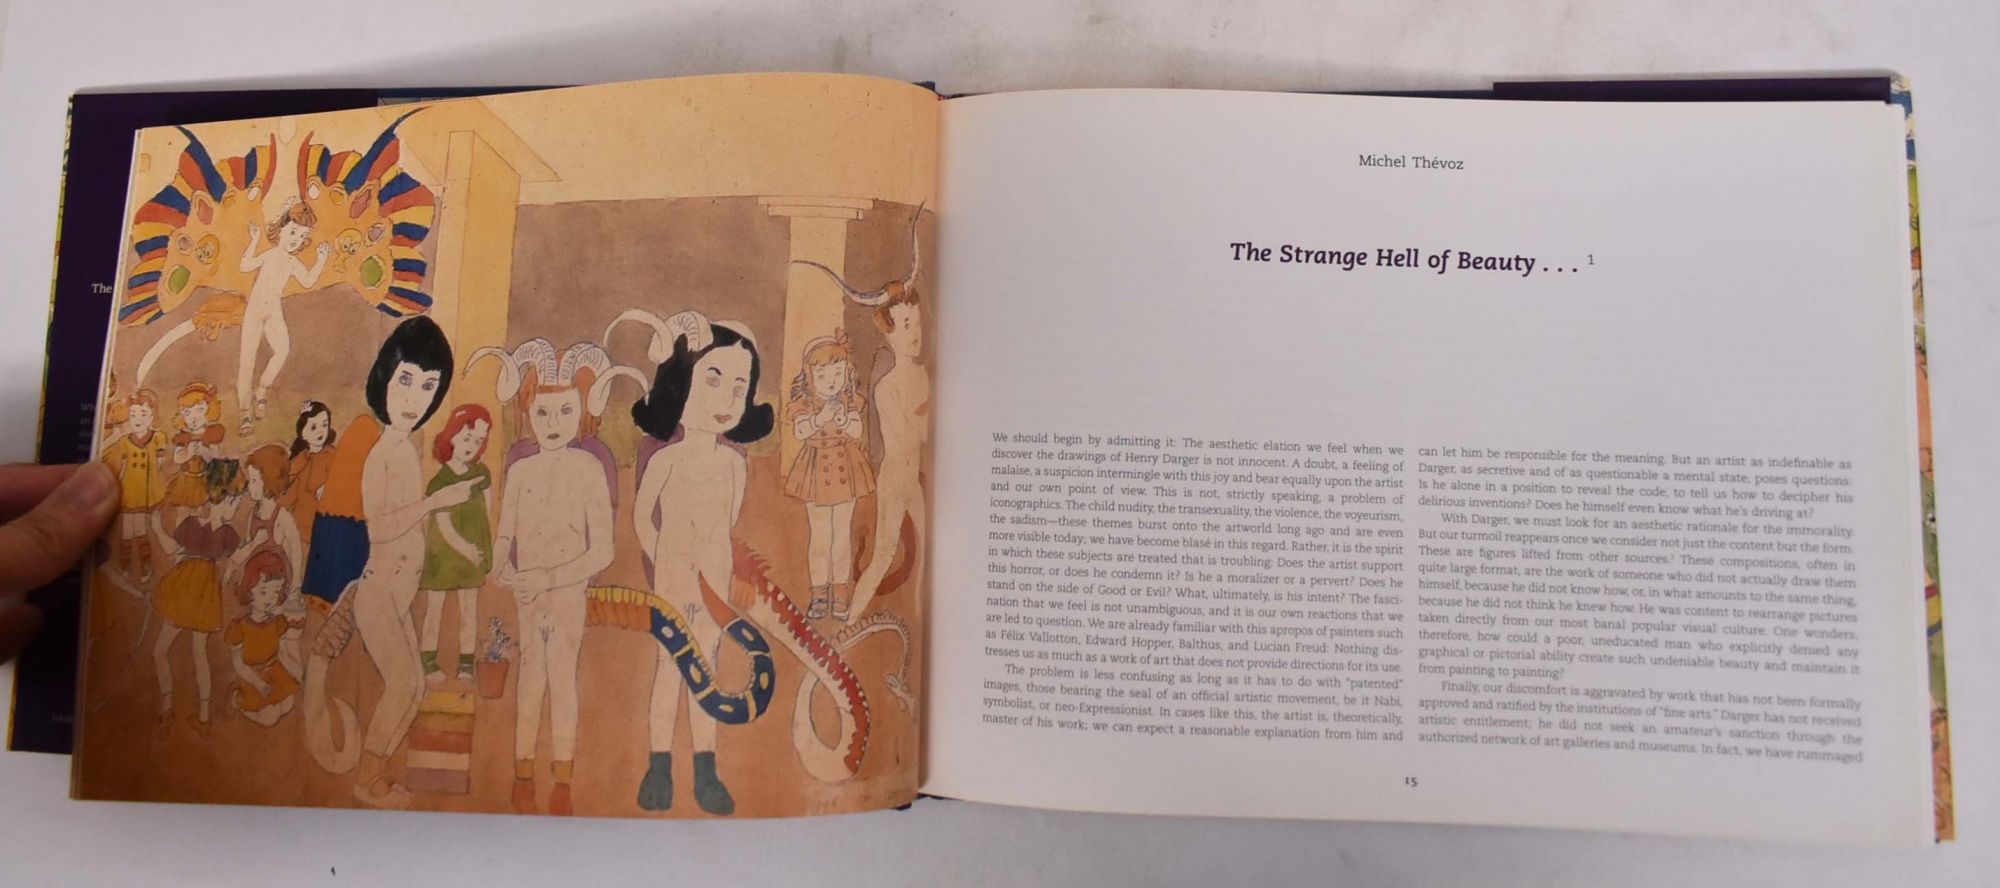 Darger: The Henry Darger Collection at the American Folk Art 